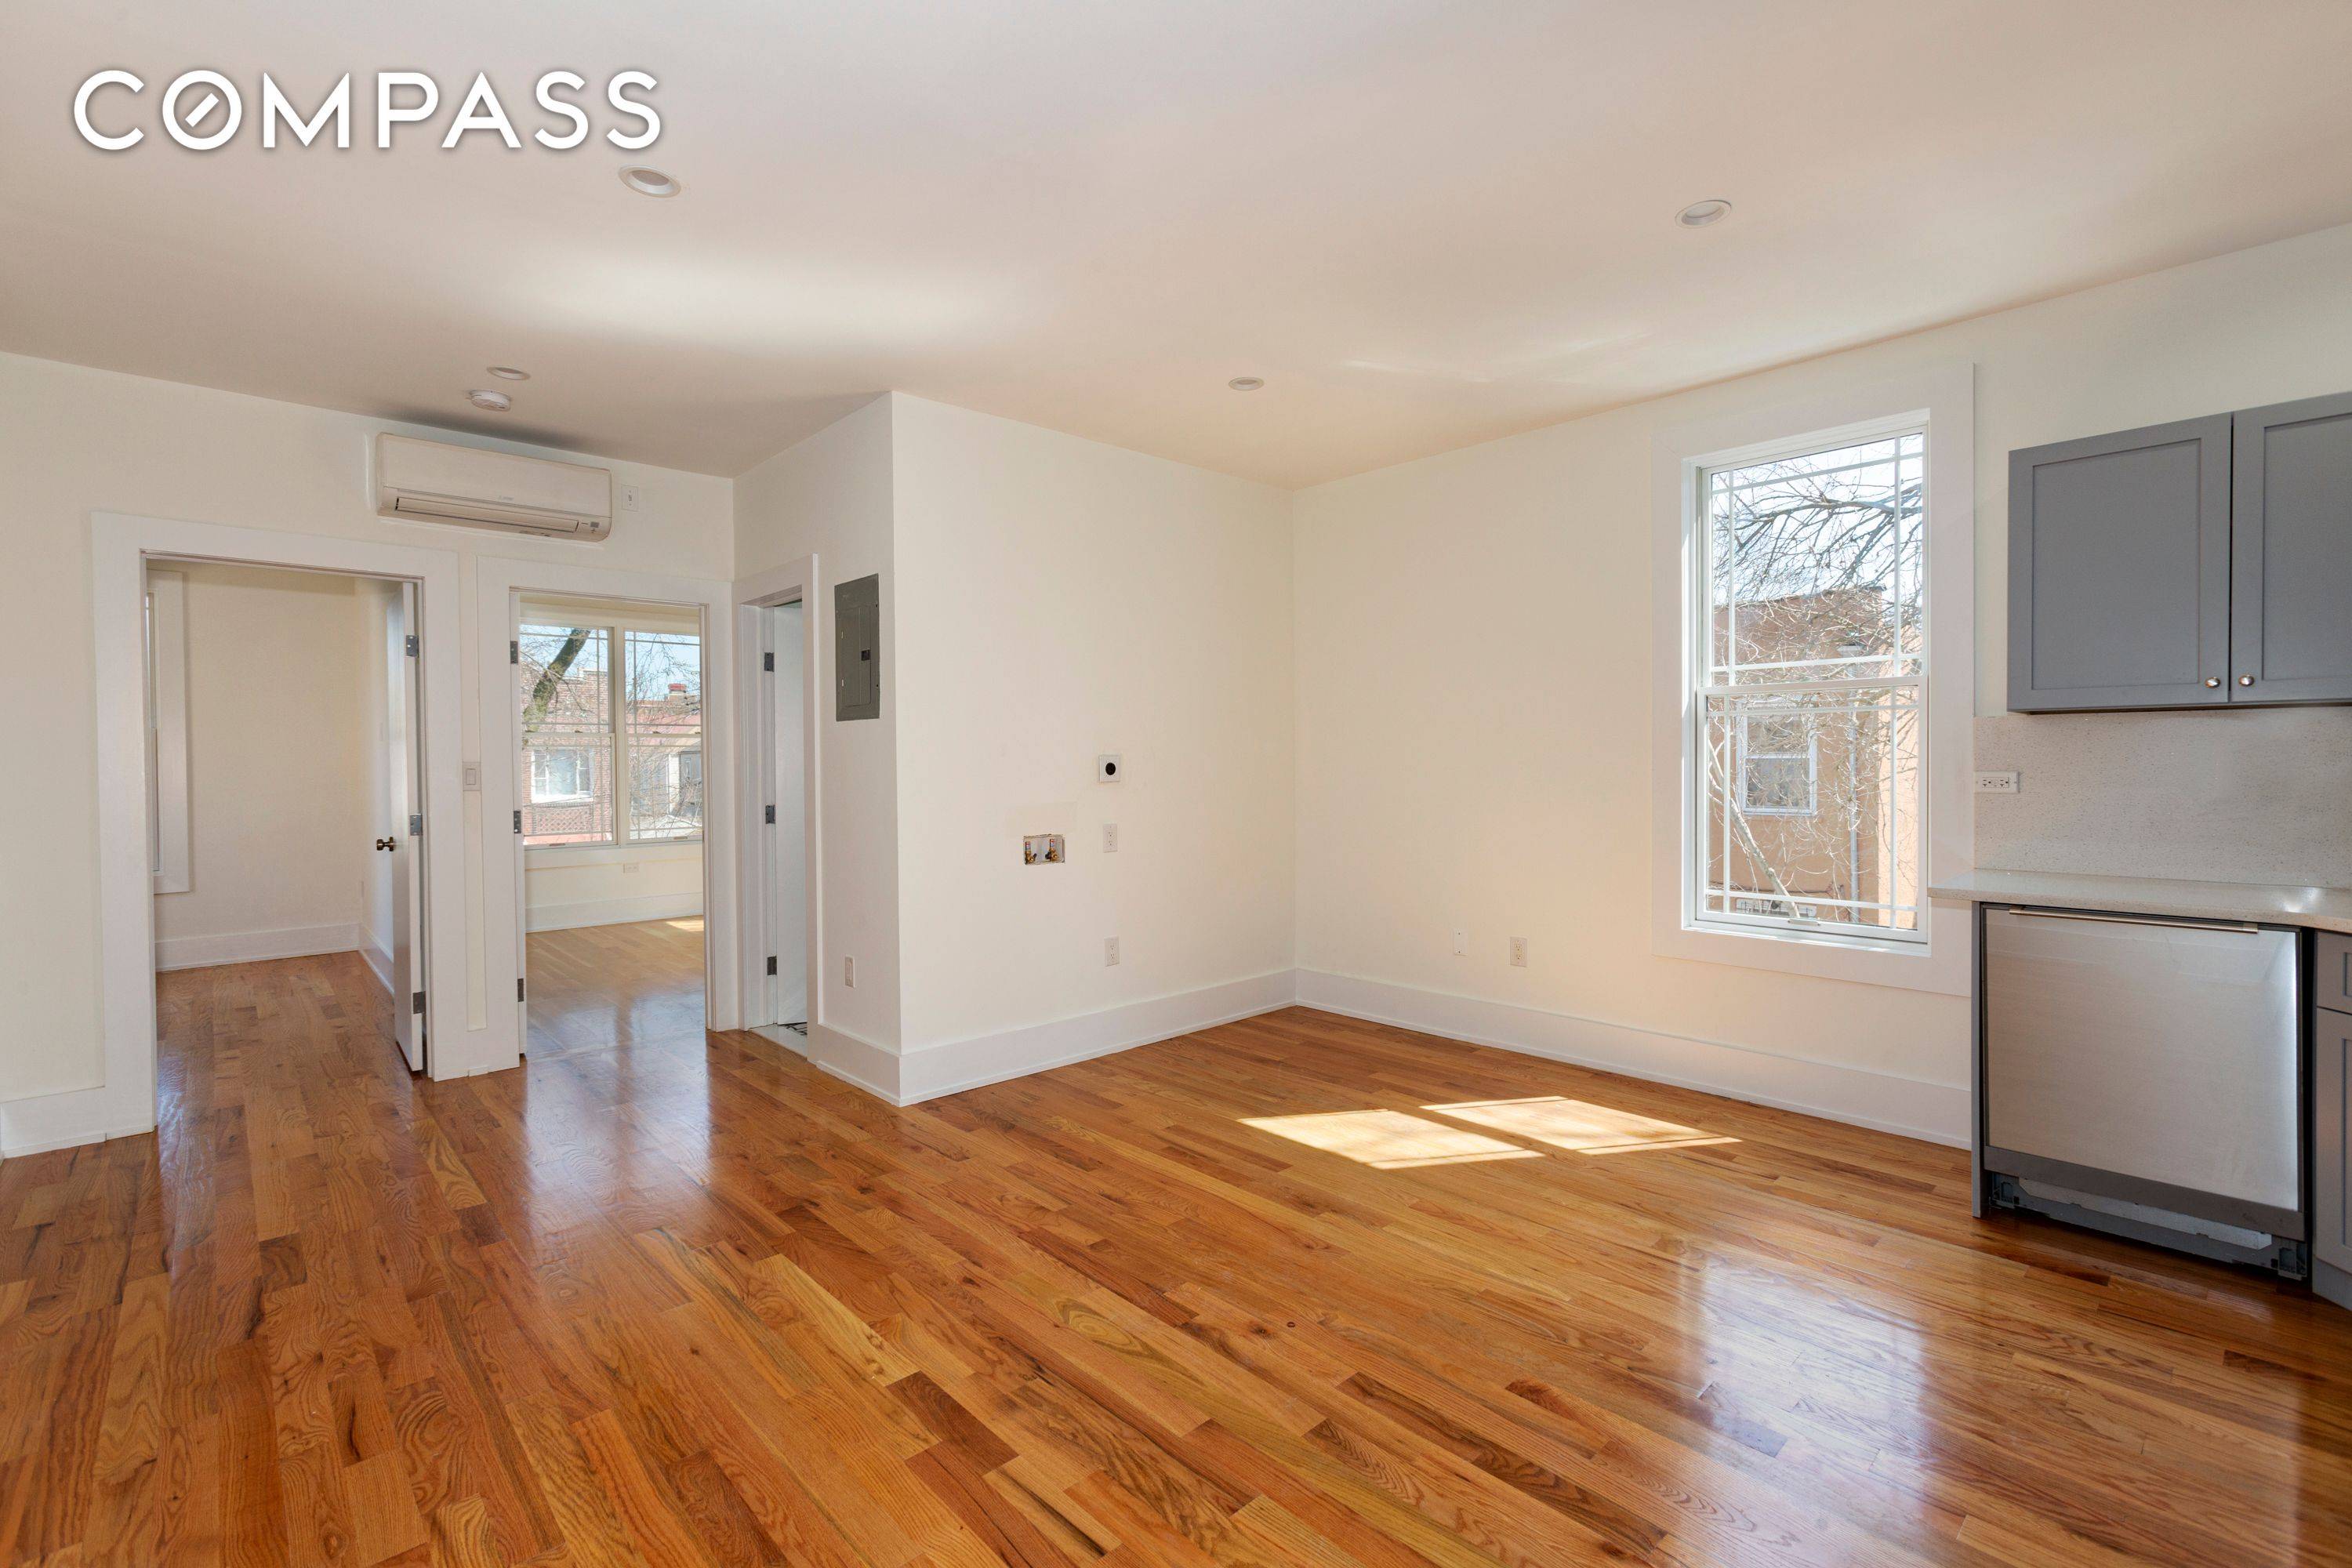 Get ready to move in on May 1st to this fully renovated 4 bedroom, 2 bathroom apartment located in a brick two family townhouse in East Flatbush.